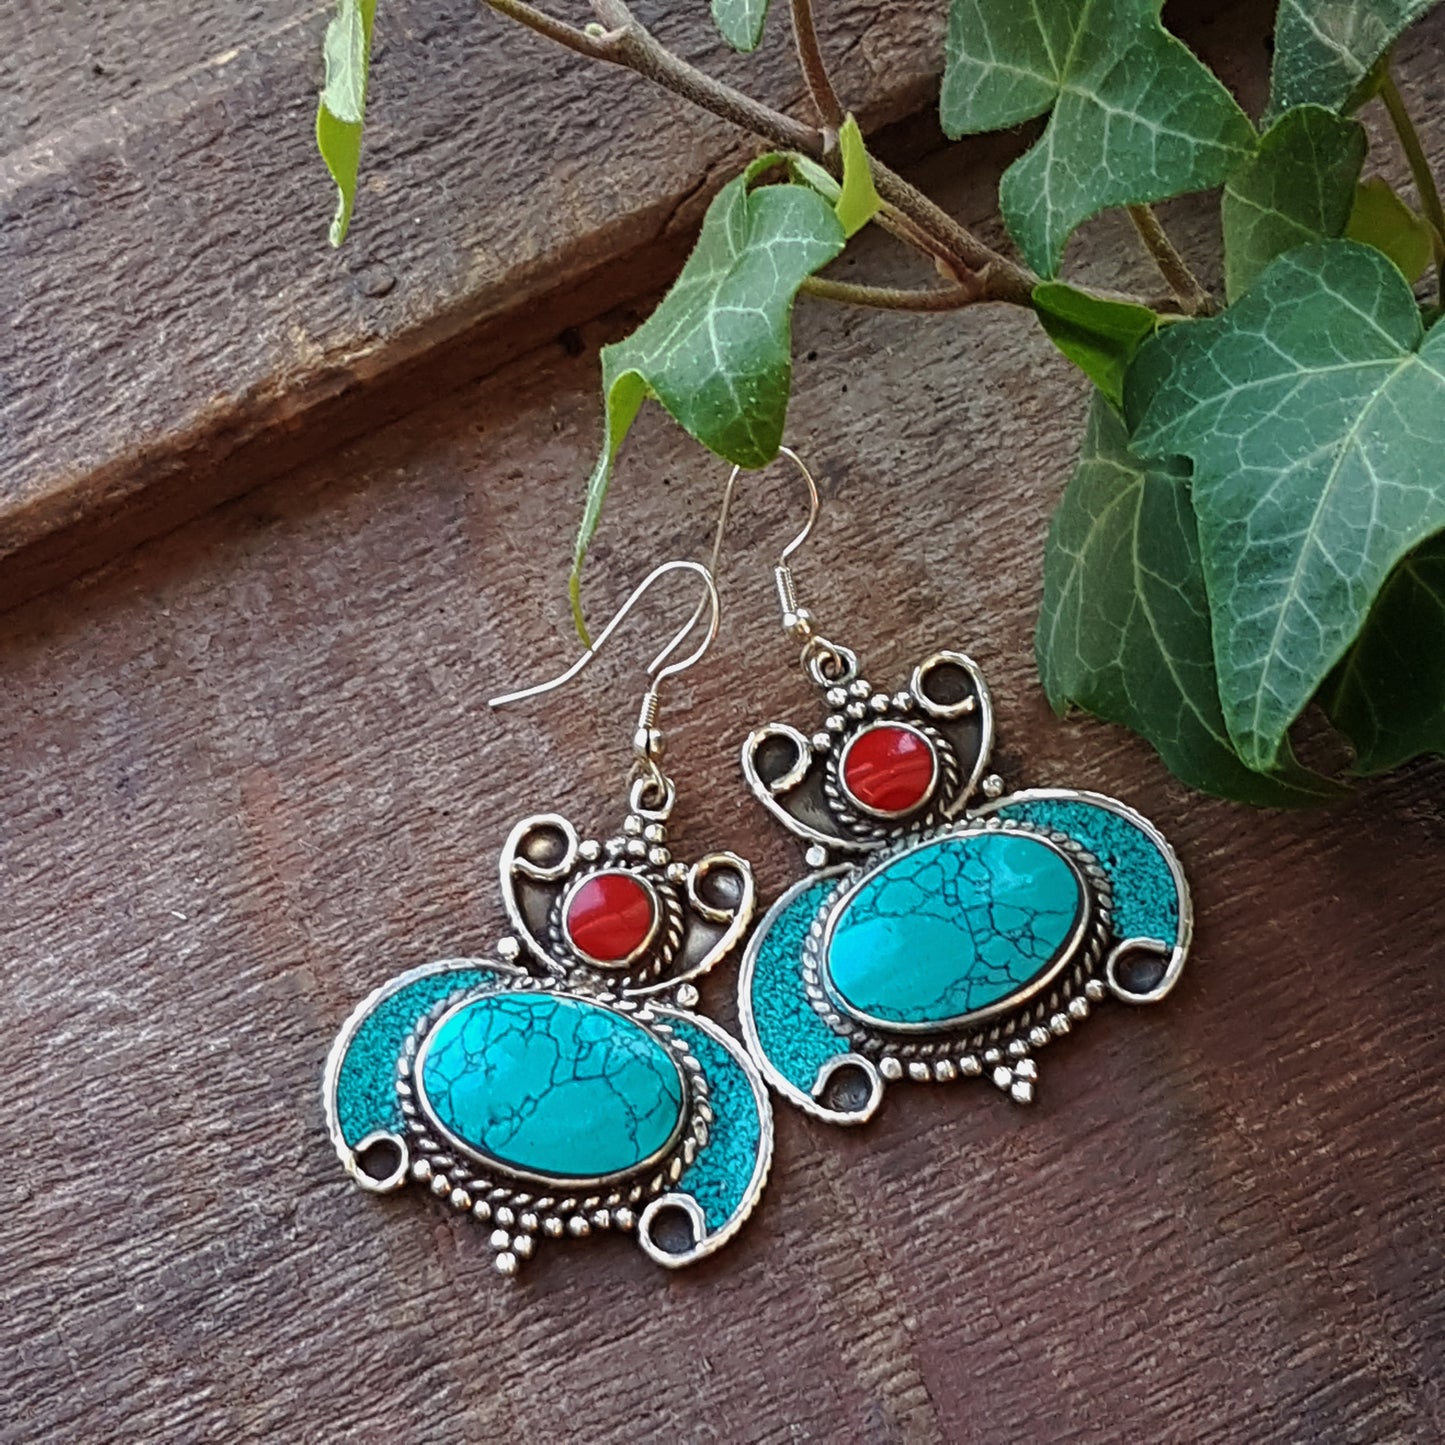 Turquoise & silver tone Boho gypsy tribal earrings. Ethnic statement drop design with coral accents. Tibetan style 2 inch hang by 1.5  inch.